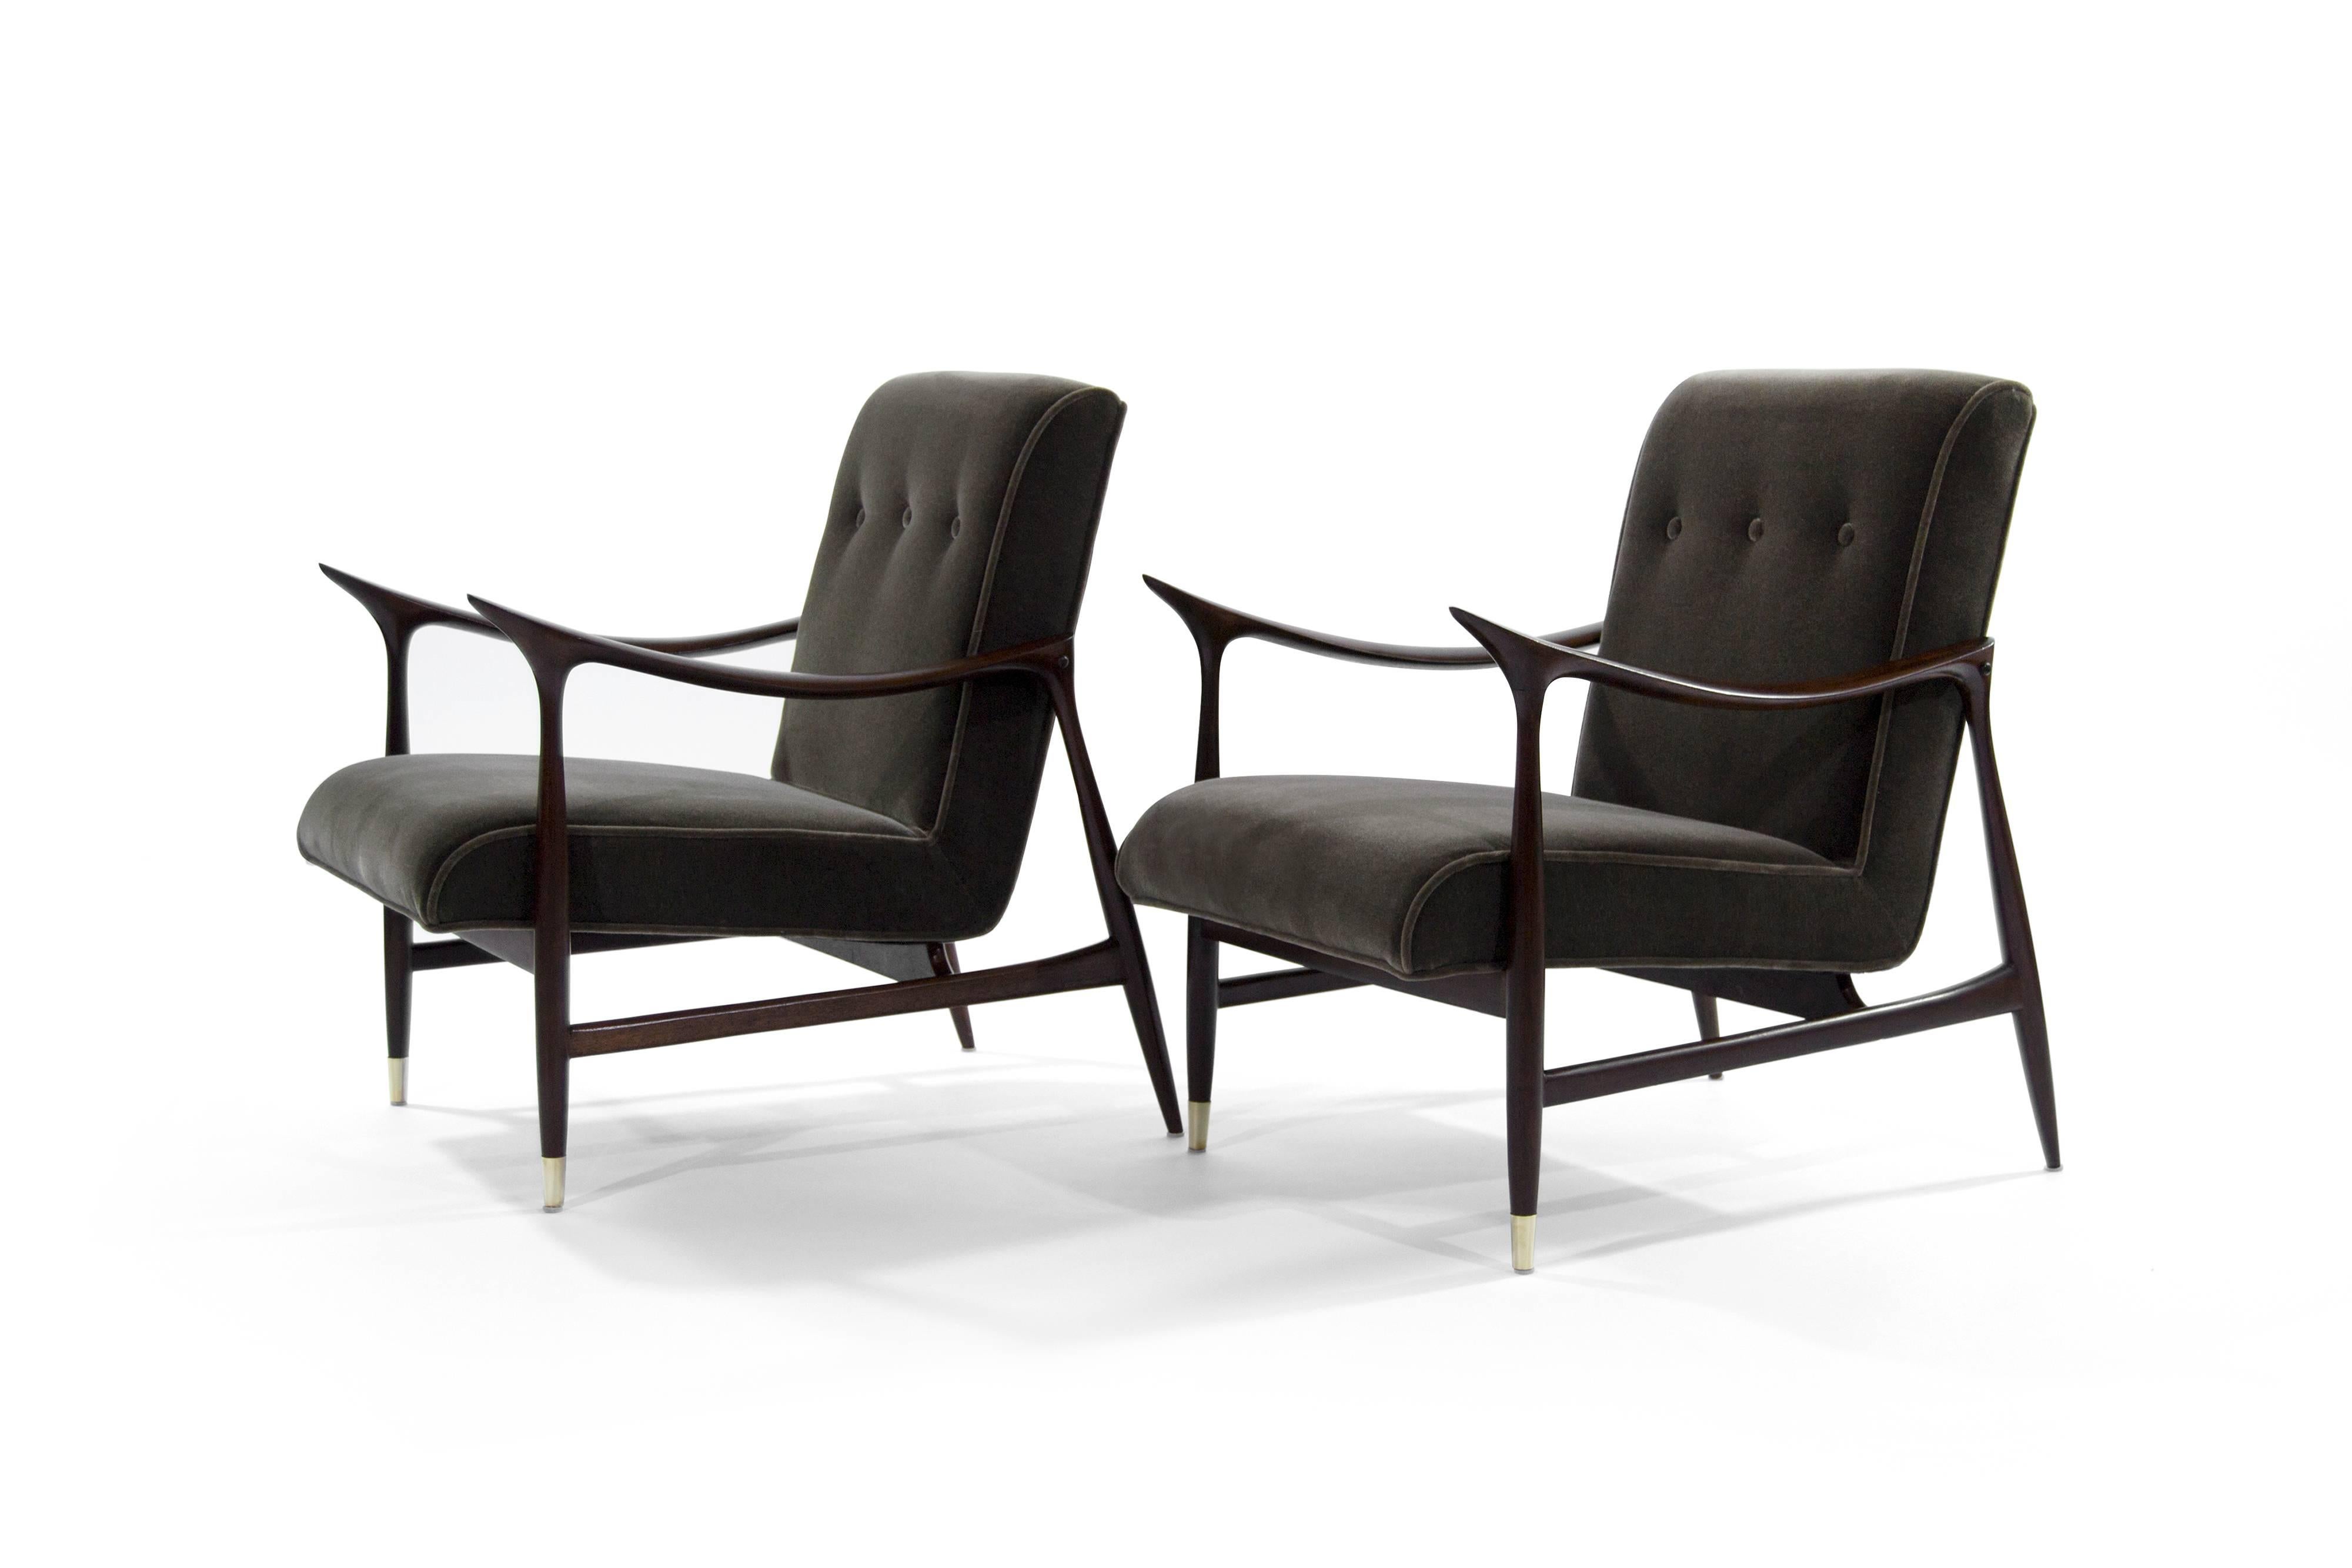 20th Century Sculptural Brazilian Lounge Chairs in Mohair